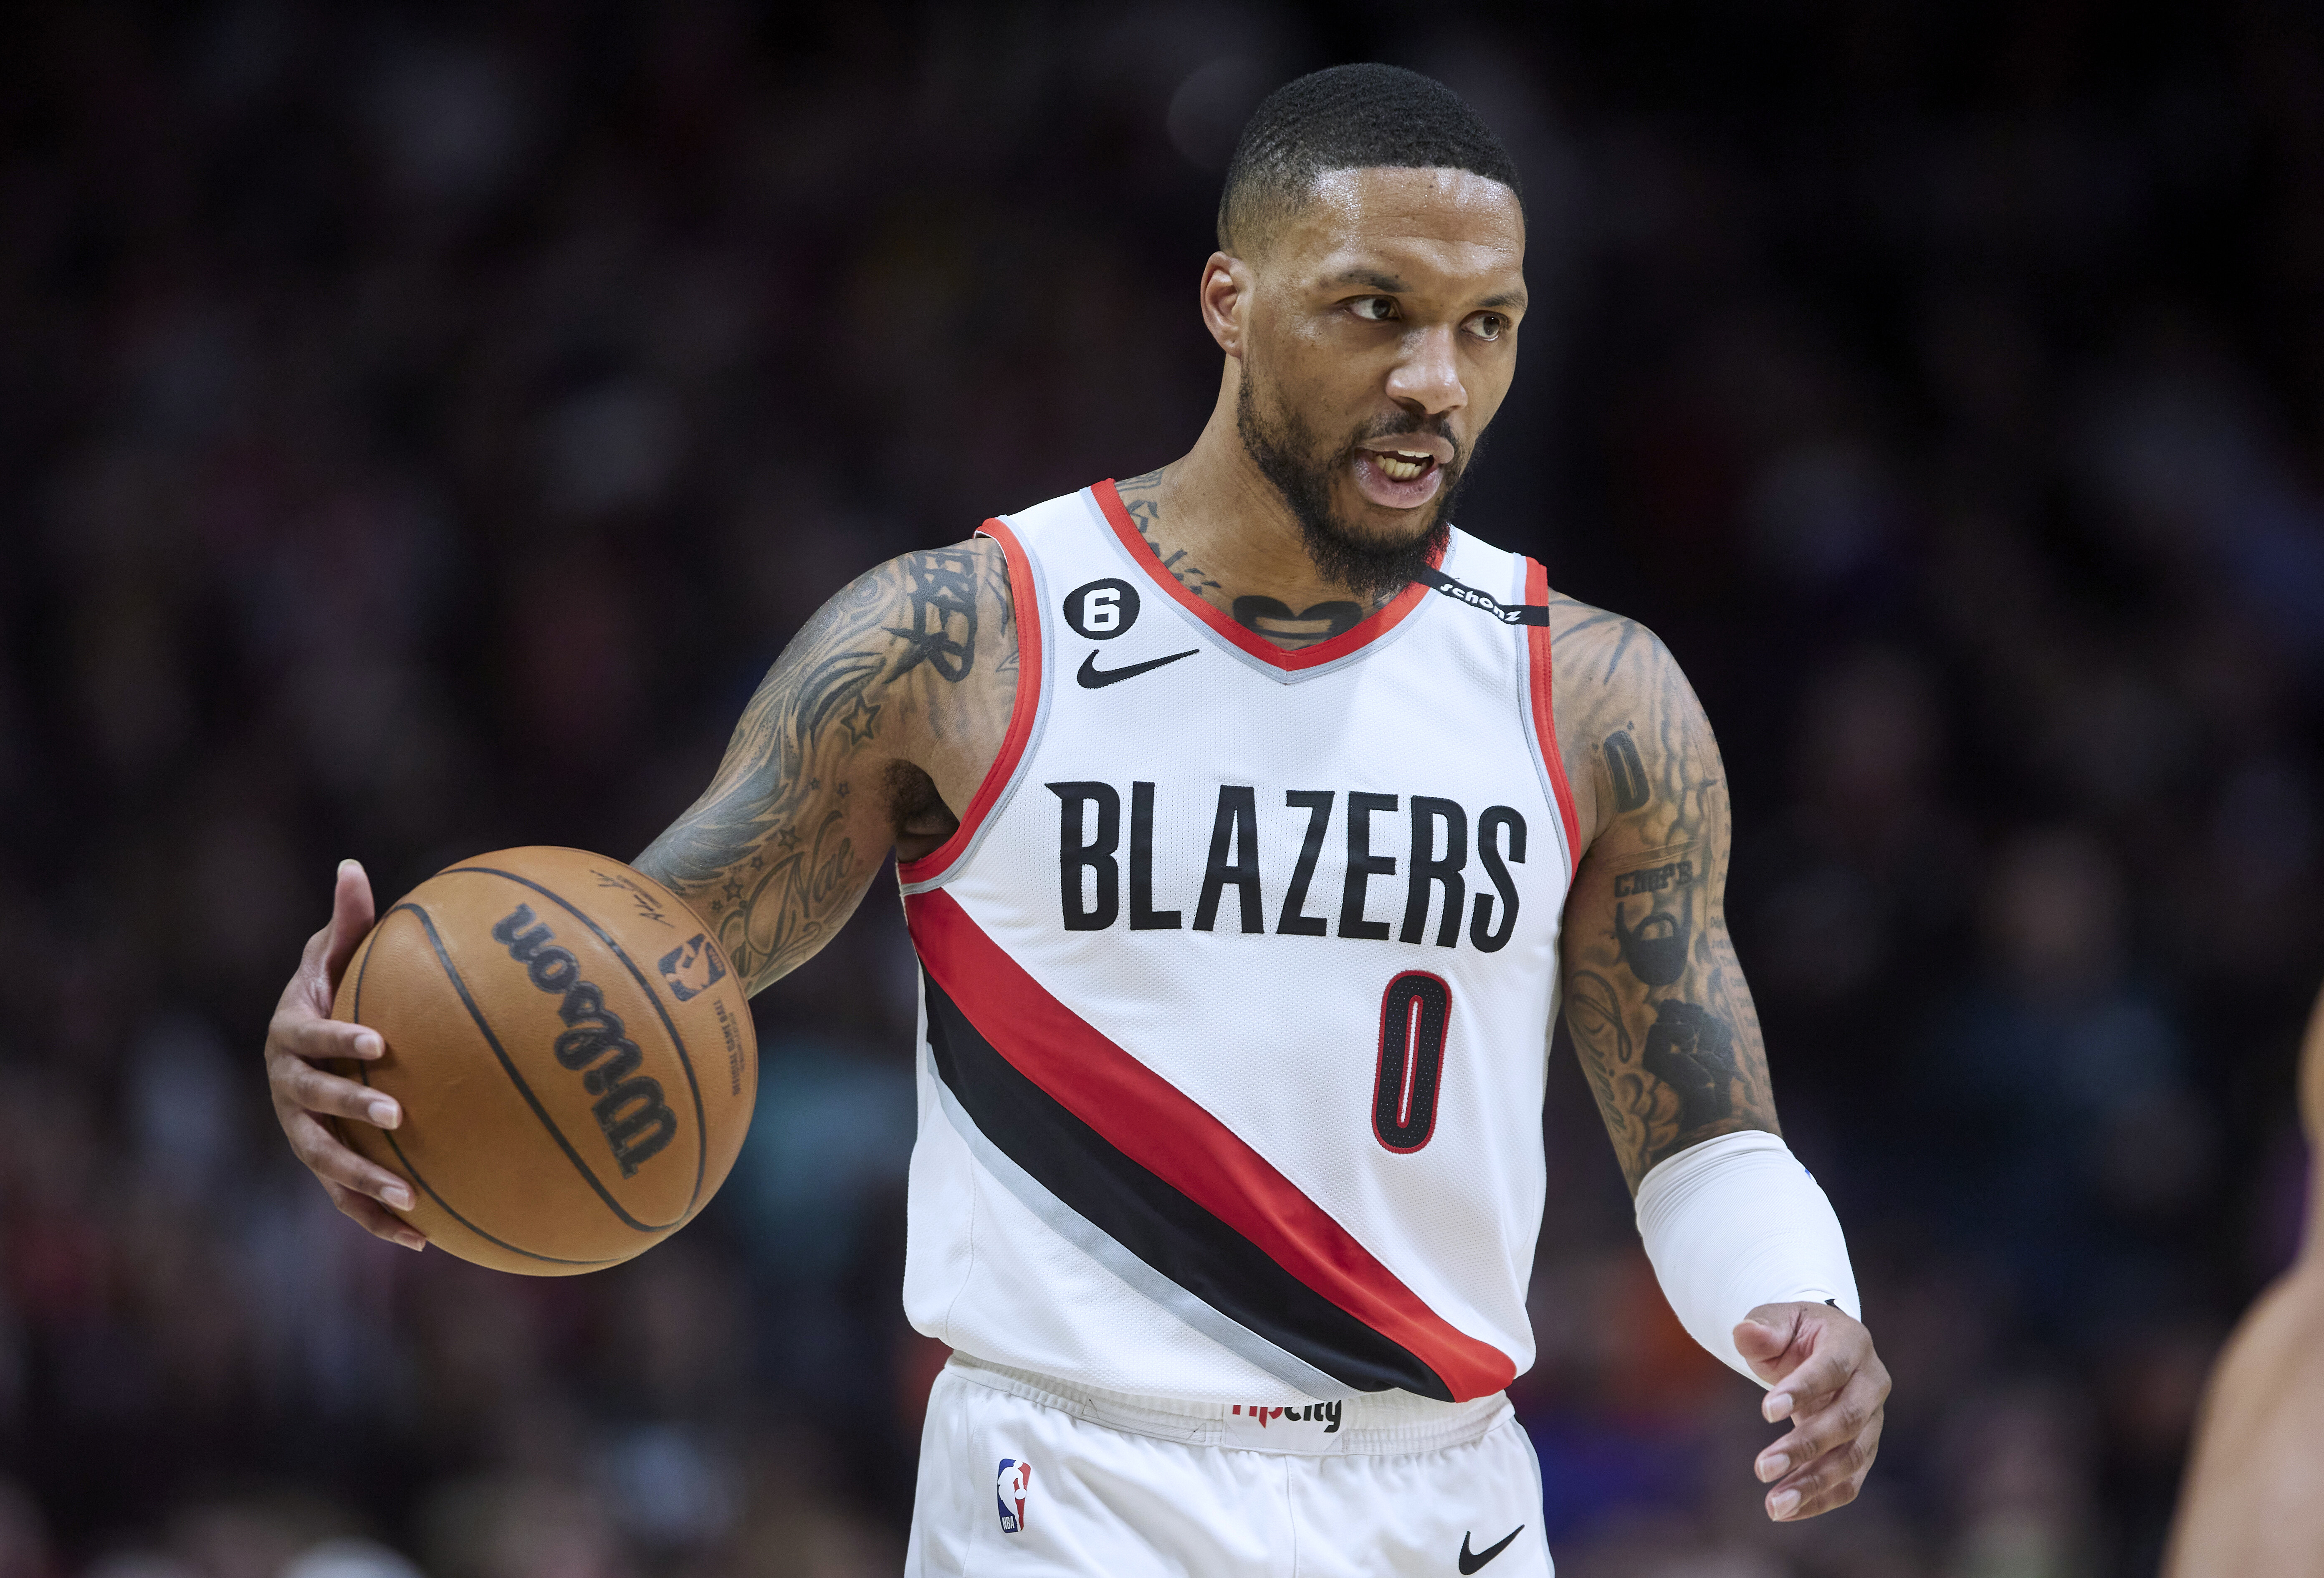 Damian Lillard is being traded from the Trail Blazers to the Bucks, ending  long saga - OPB